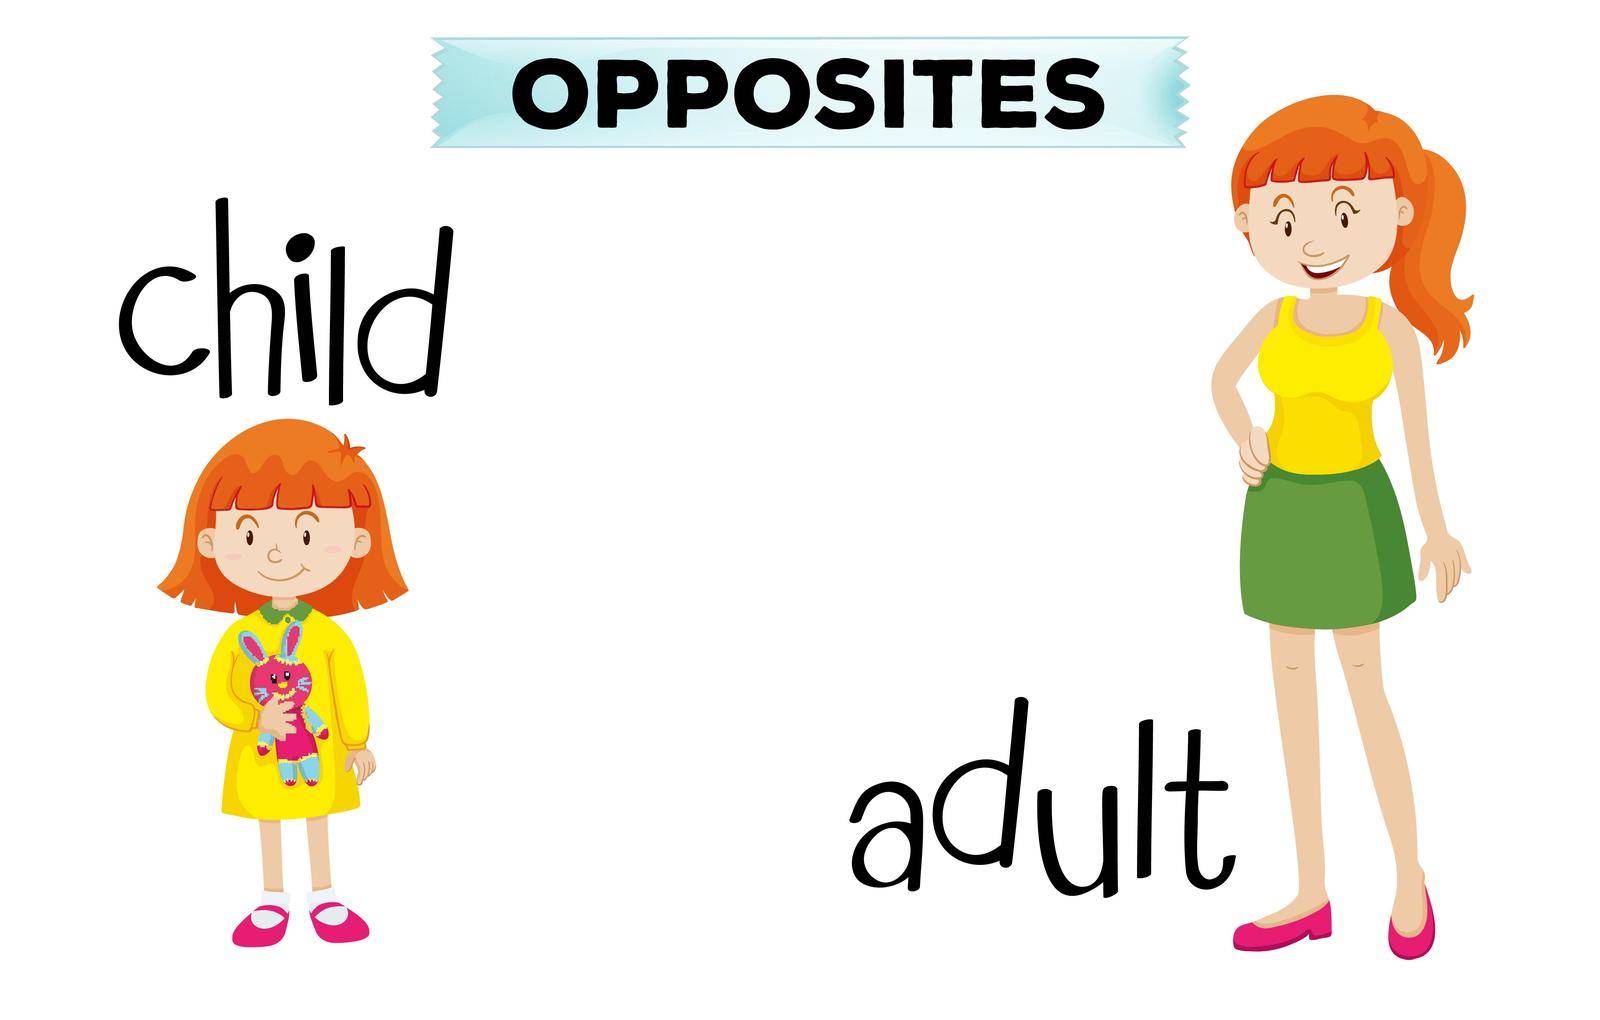 Opposite wordcard with child and adult illustration